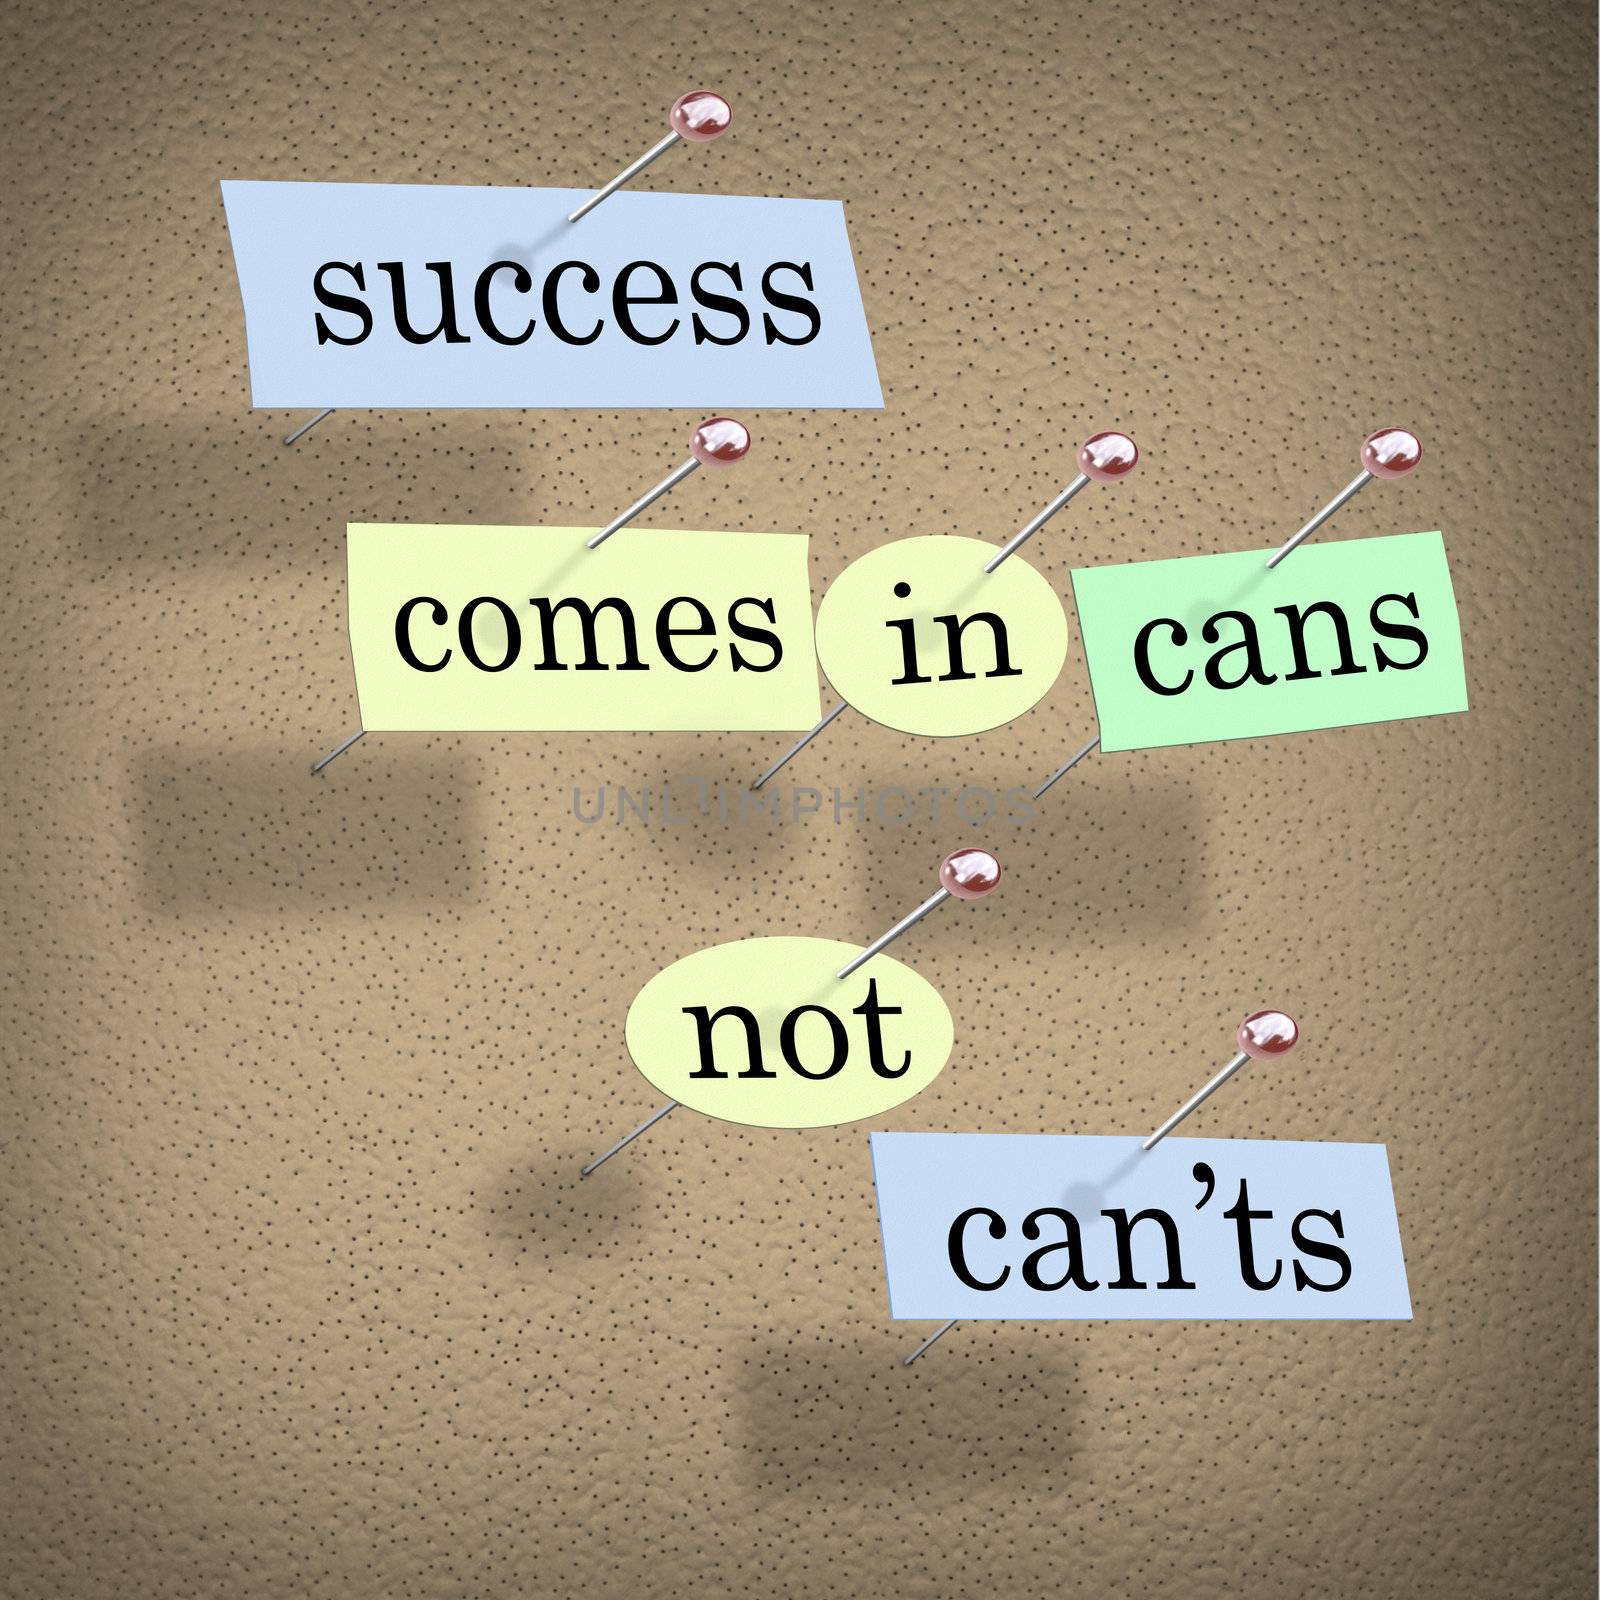 Success Comes in Cans Not Can'ts Positive Attitude Saying by iQoncept